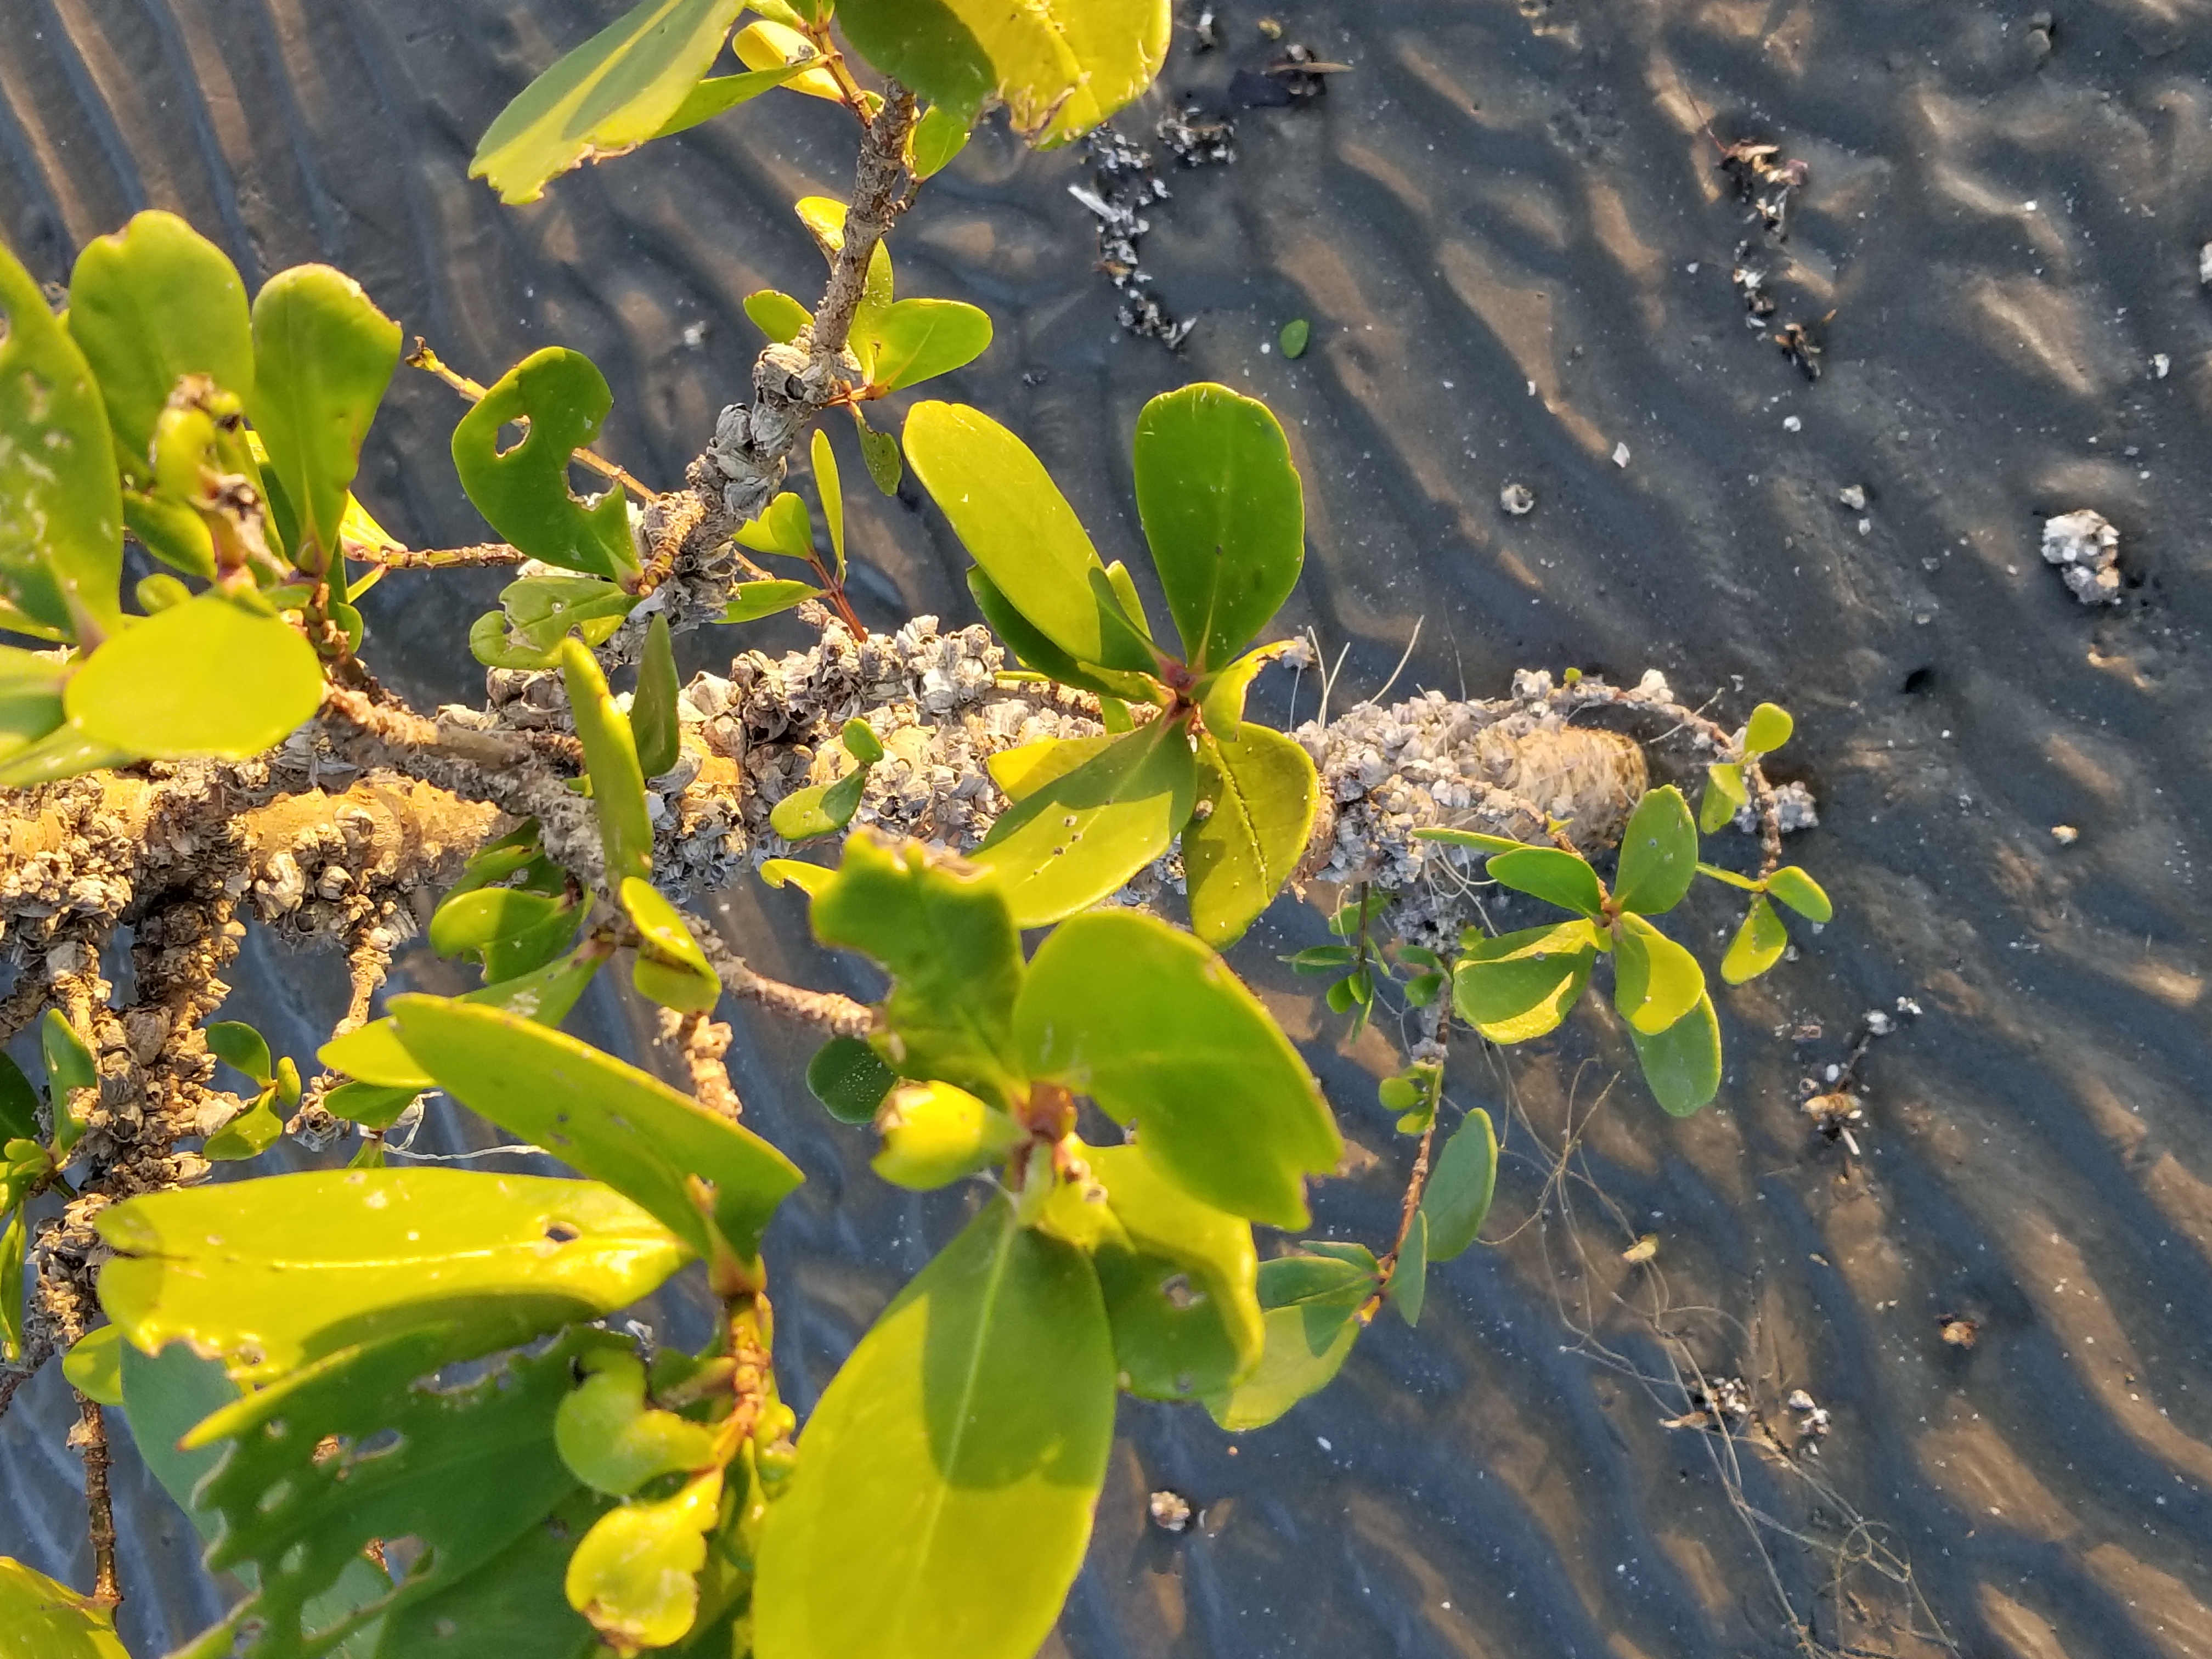 Young mangrove tree struggling to survive due to barnacle infestation 